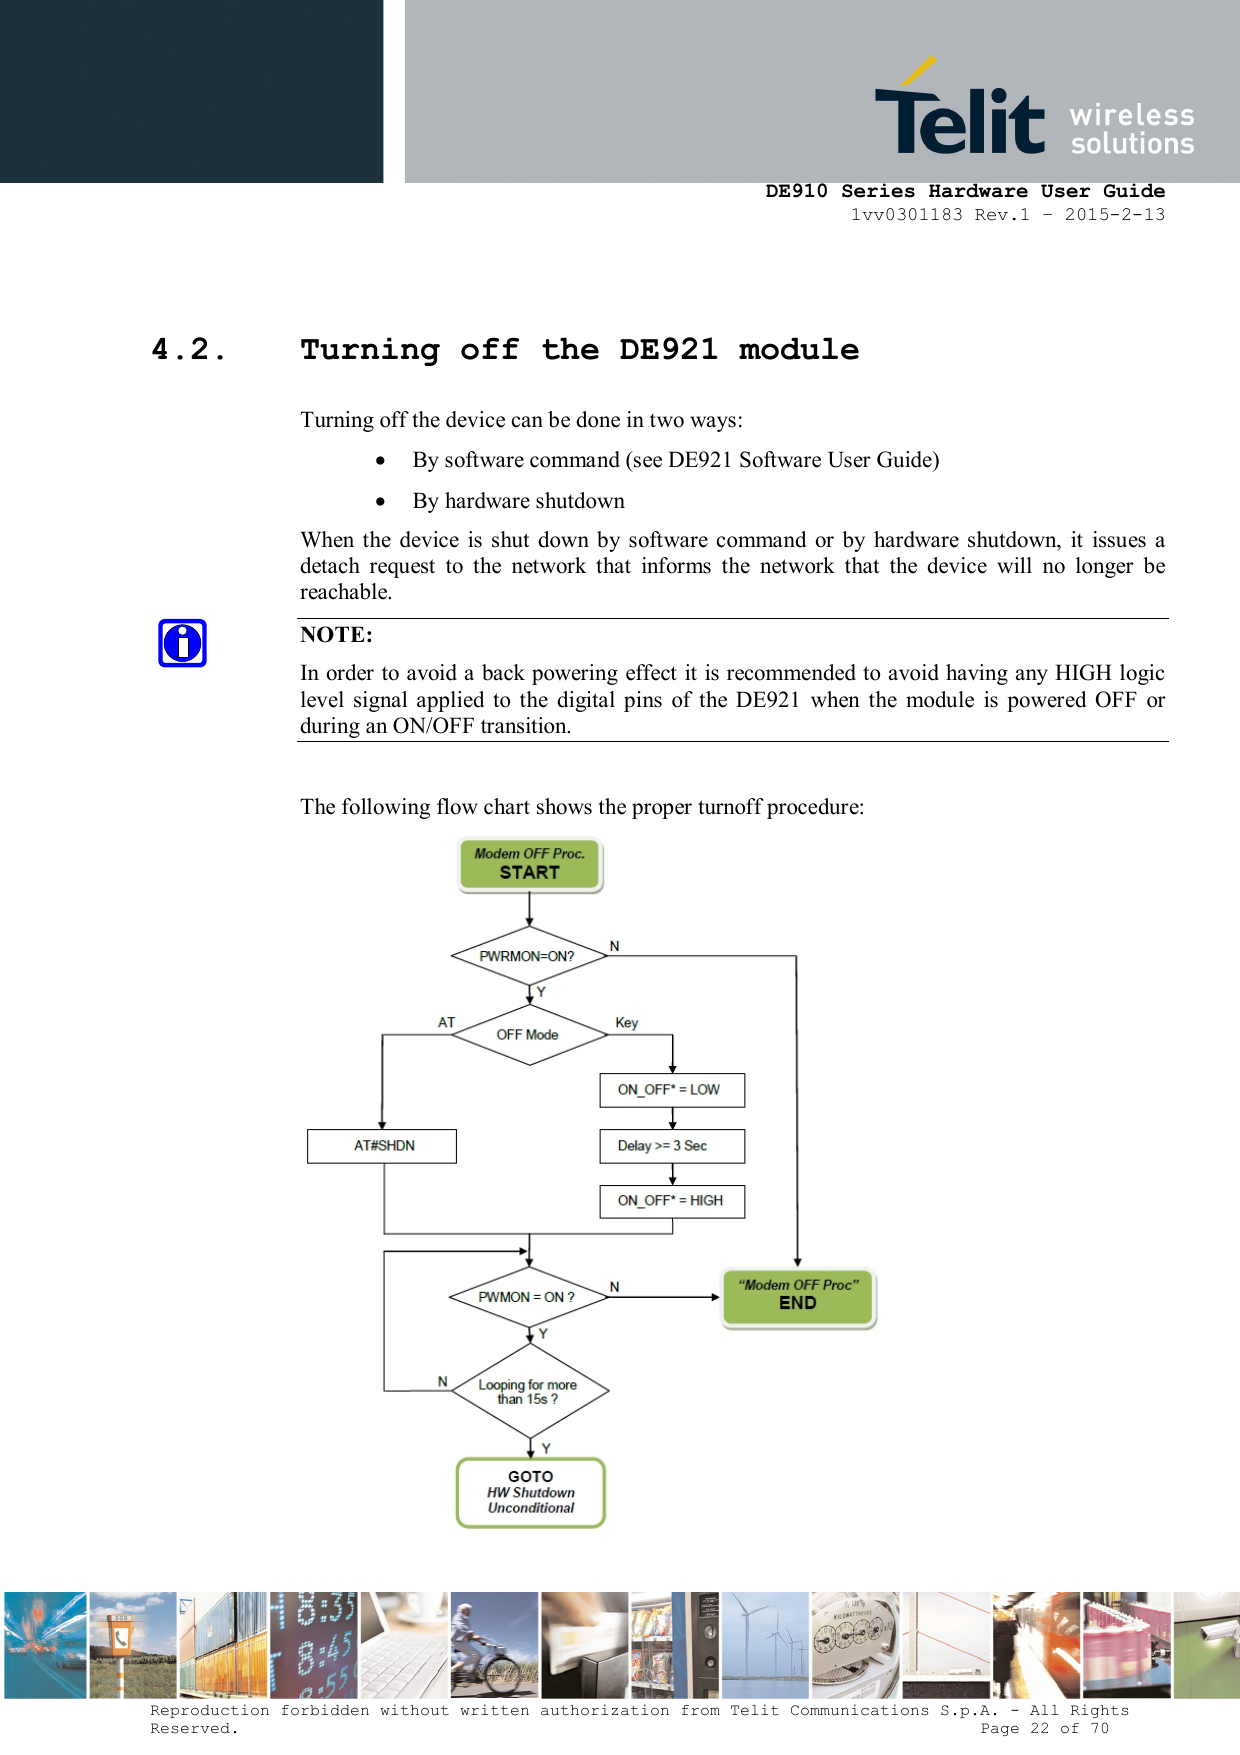      DE910 Series Hardware User Guide 1vv0301183 Rev.1 – 2015-2-13 Reproduction forbidden without written authorization from Telit Communications S.p.A. - All Rights Reserved.                                                                          Page 22 of 70  4.2. Turning off the DE921 module Turning off the device can be done in two ways:  By software command (see DE921 Software User Guide)  By hardware shutdown When  the  device is  shut down by software command  or by  hardware  shutdown,  it  issues  a detach  request  to  the  network  that  informs  the  network  that  the  device  will  no  longer  be reachable. NOTE: In order to avoid a back powering effect it is recommended to avoid having any HIGH logic level  signal  applied  to  the  digital  pins  of  the  DE921  when  the  module  is  powered  OFF  or during an ON/OFF transition.  The following flow chart shows the proper turnoff procedure:   